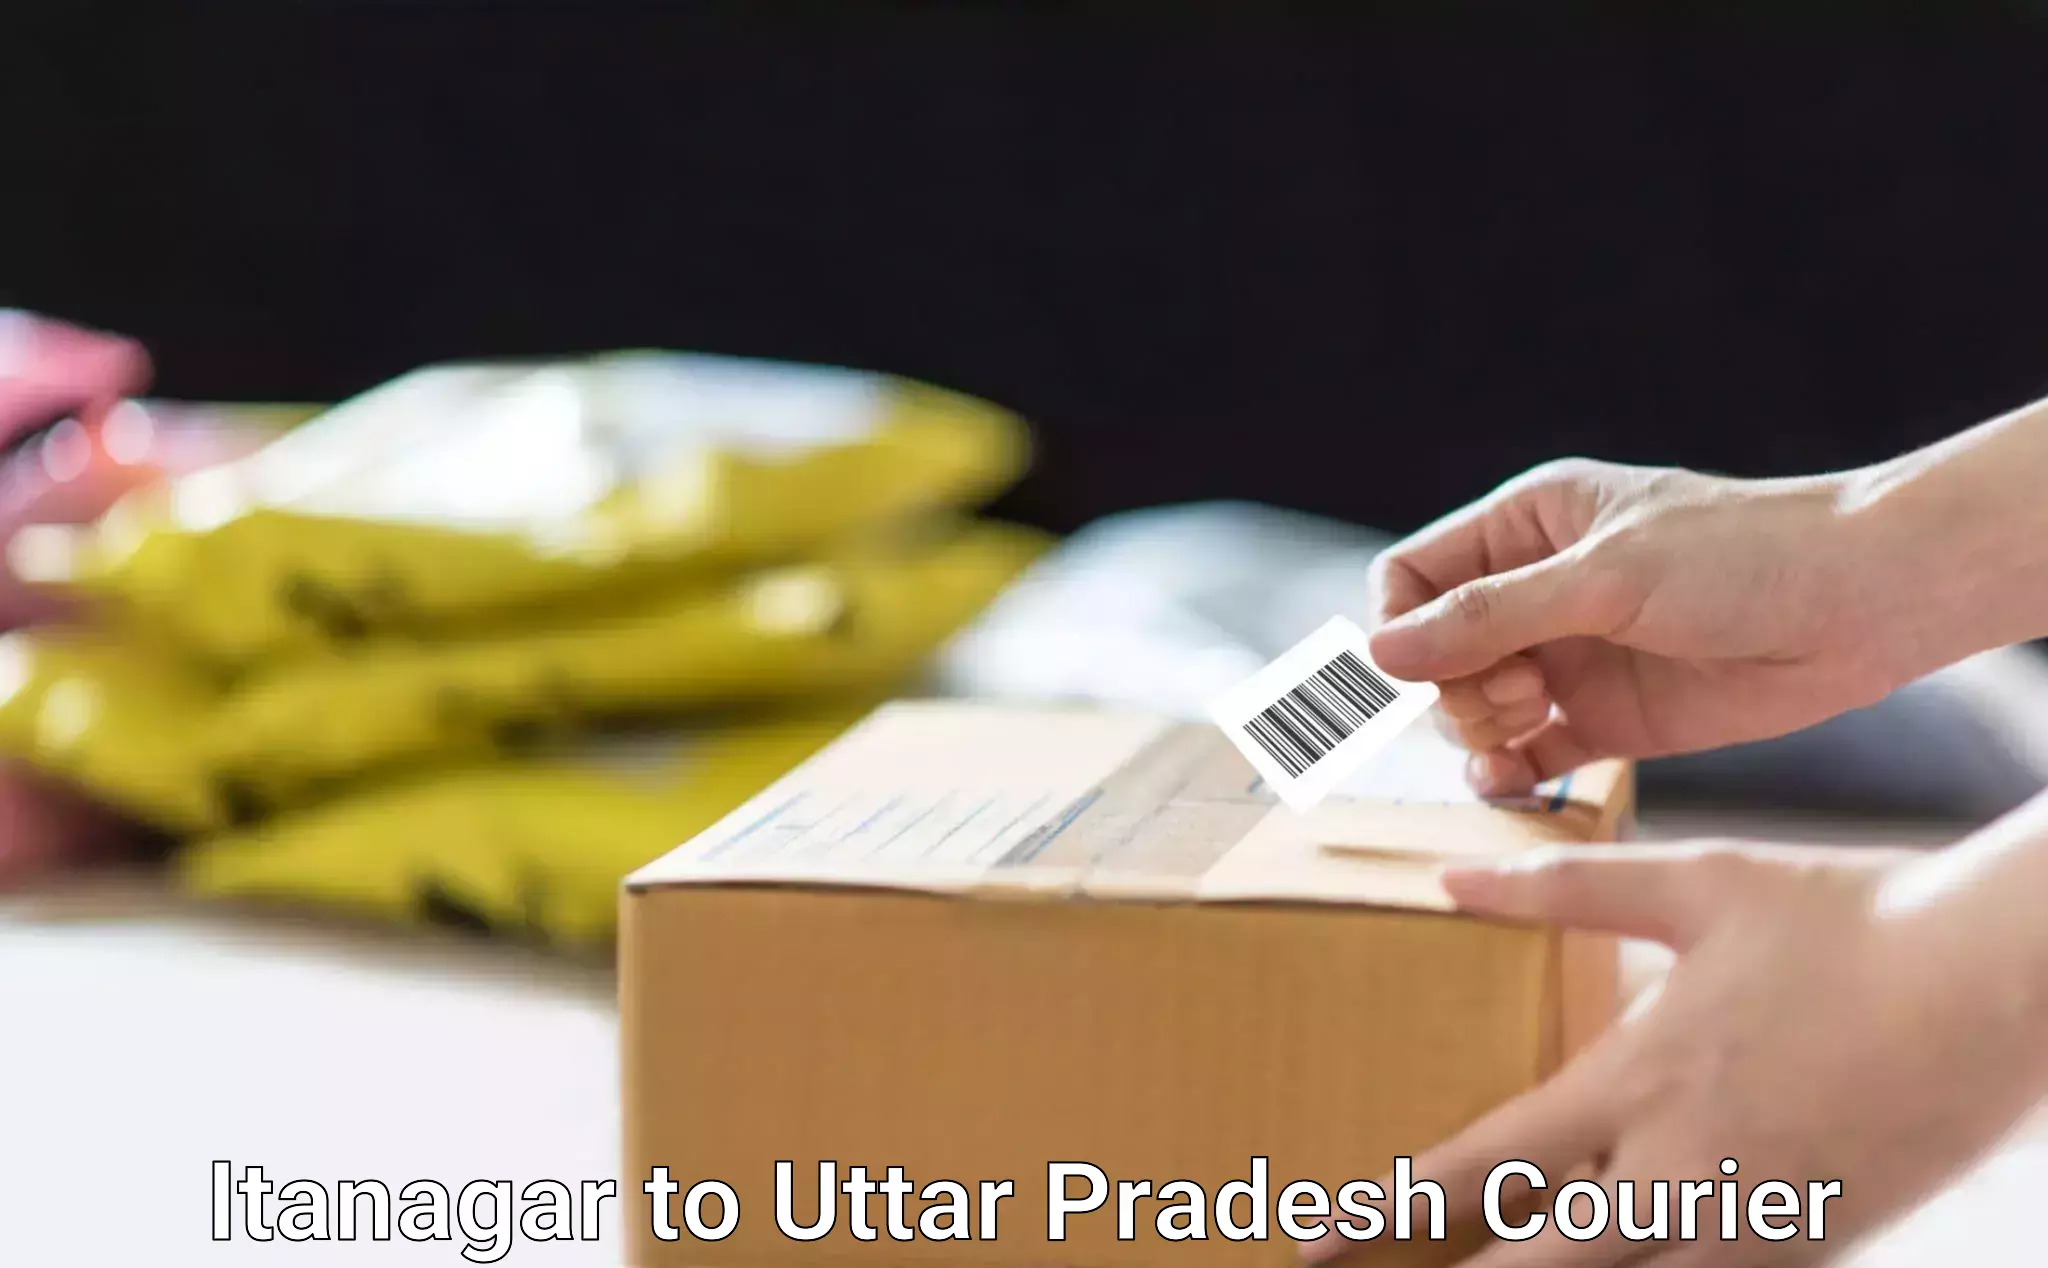 Professional courier services Itanagar to Amethi